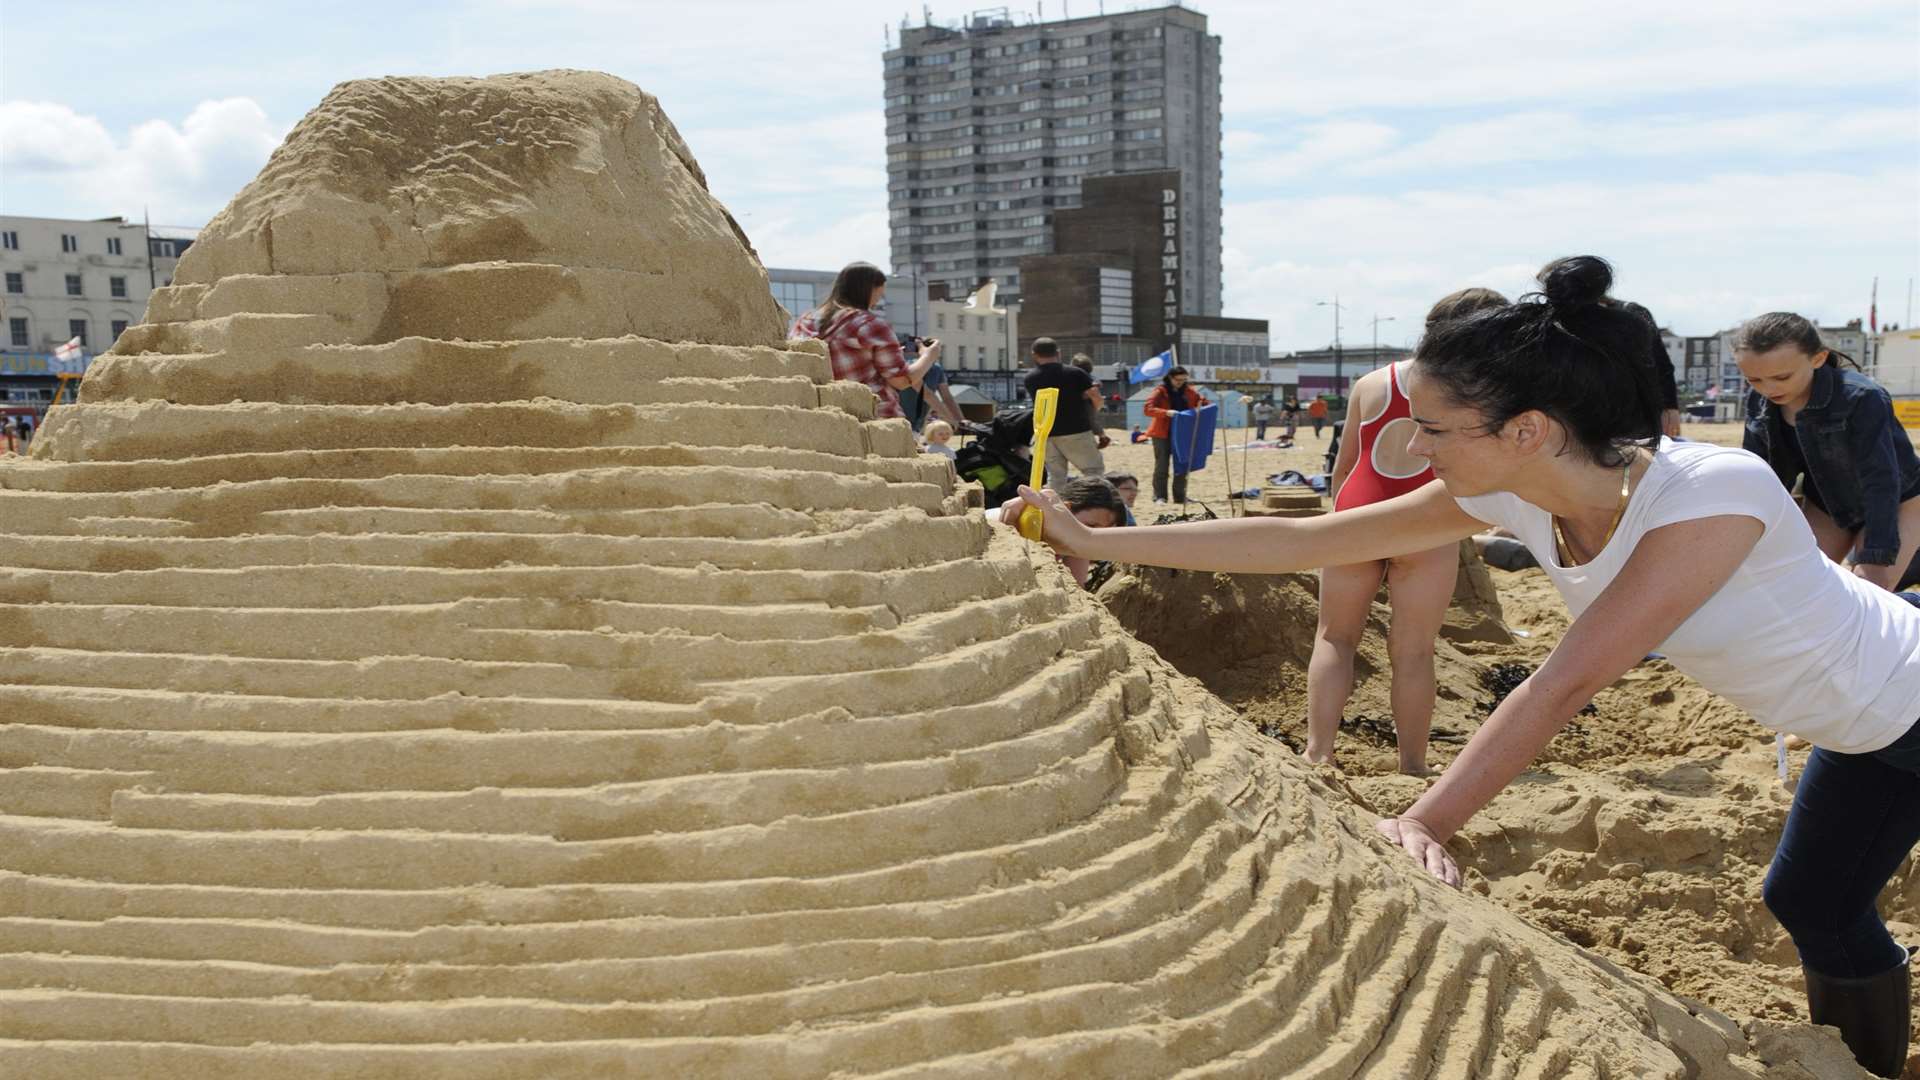 Families have been building sandcastles on Margate Main Sand for generations